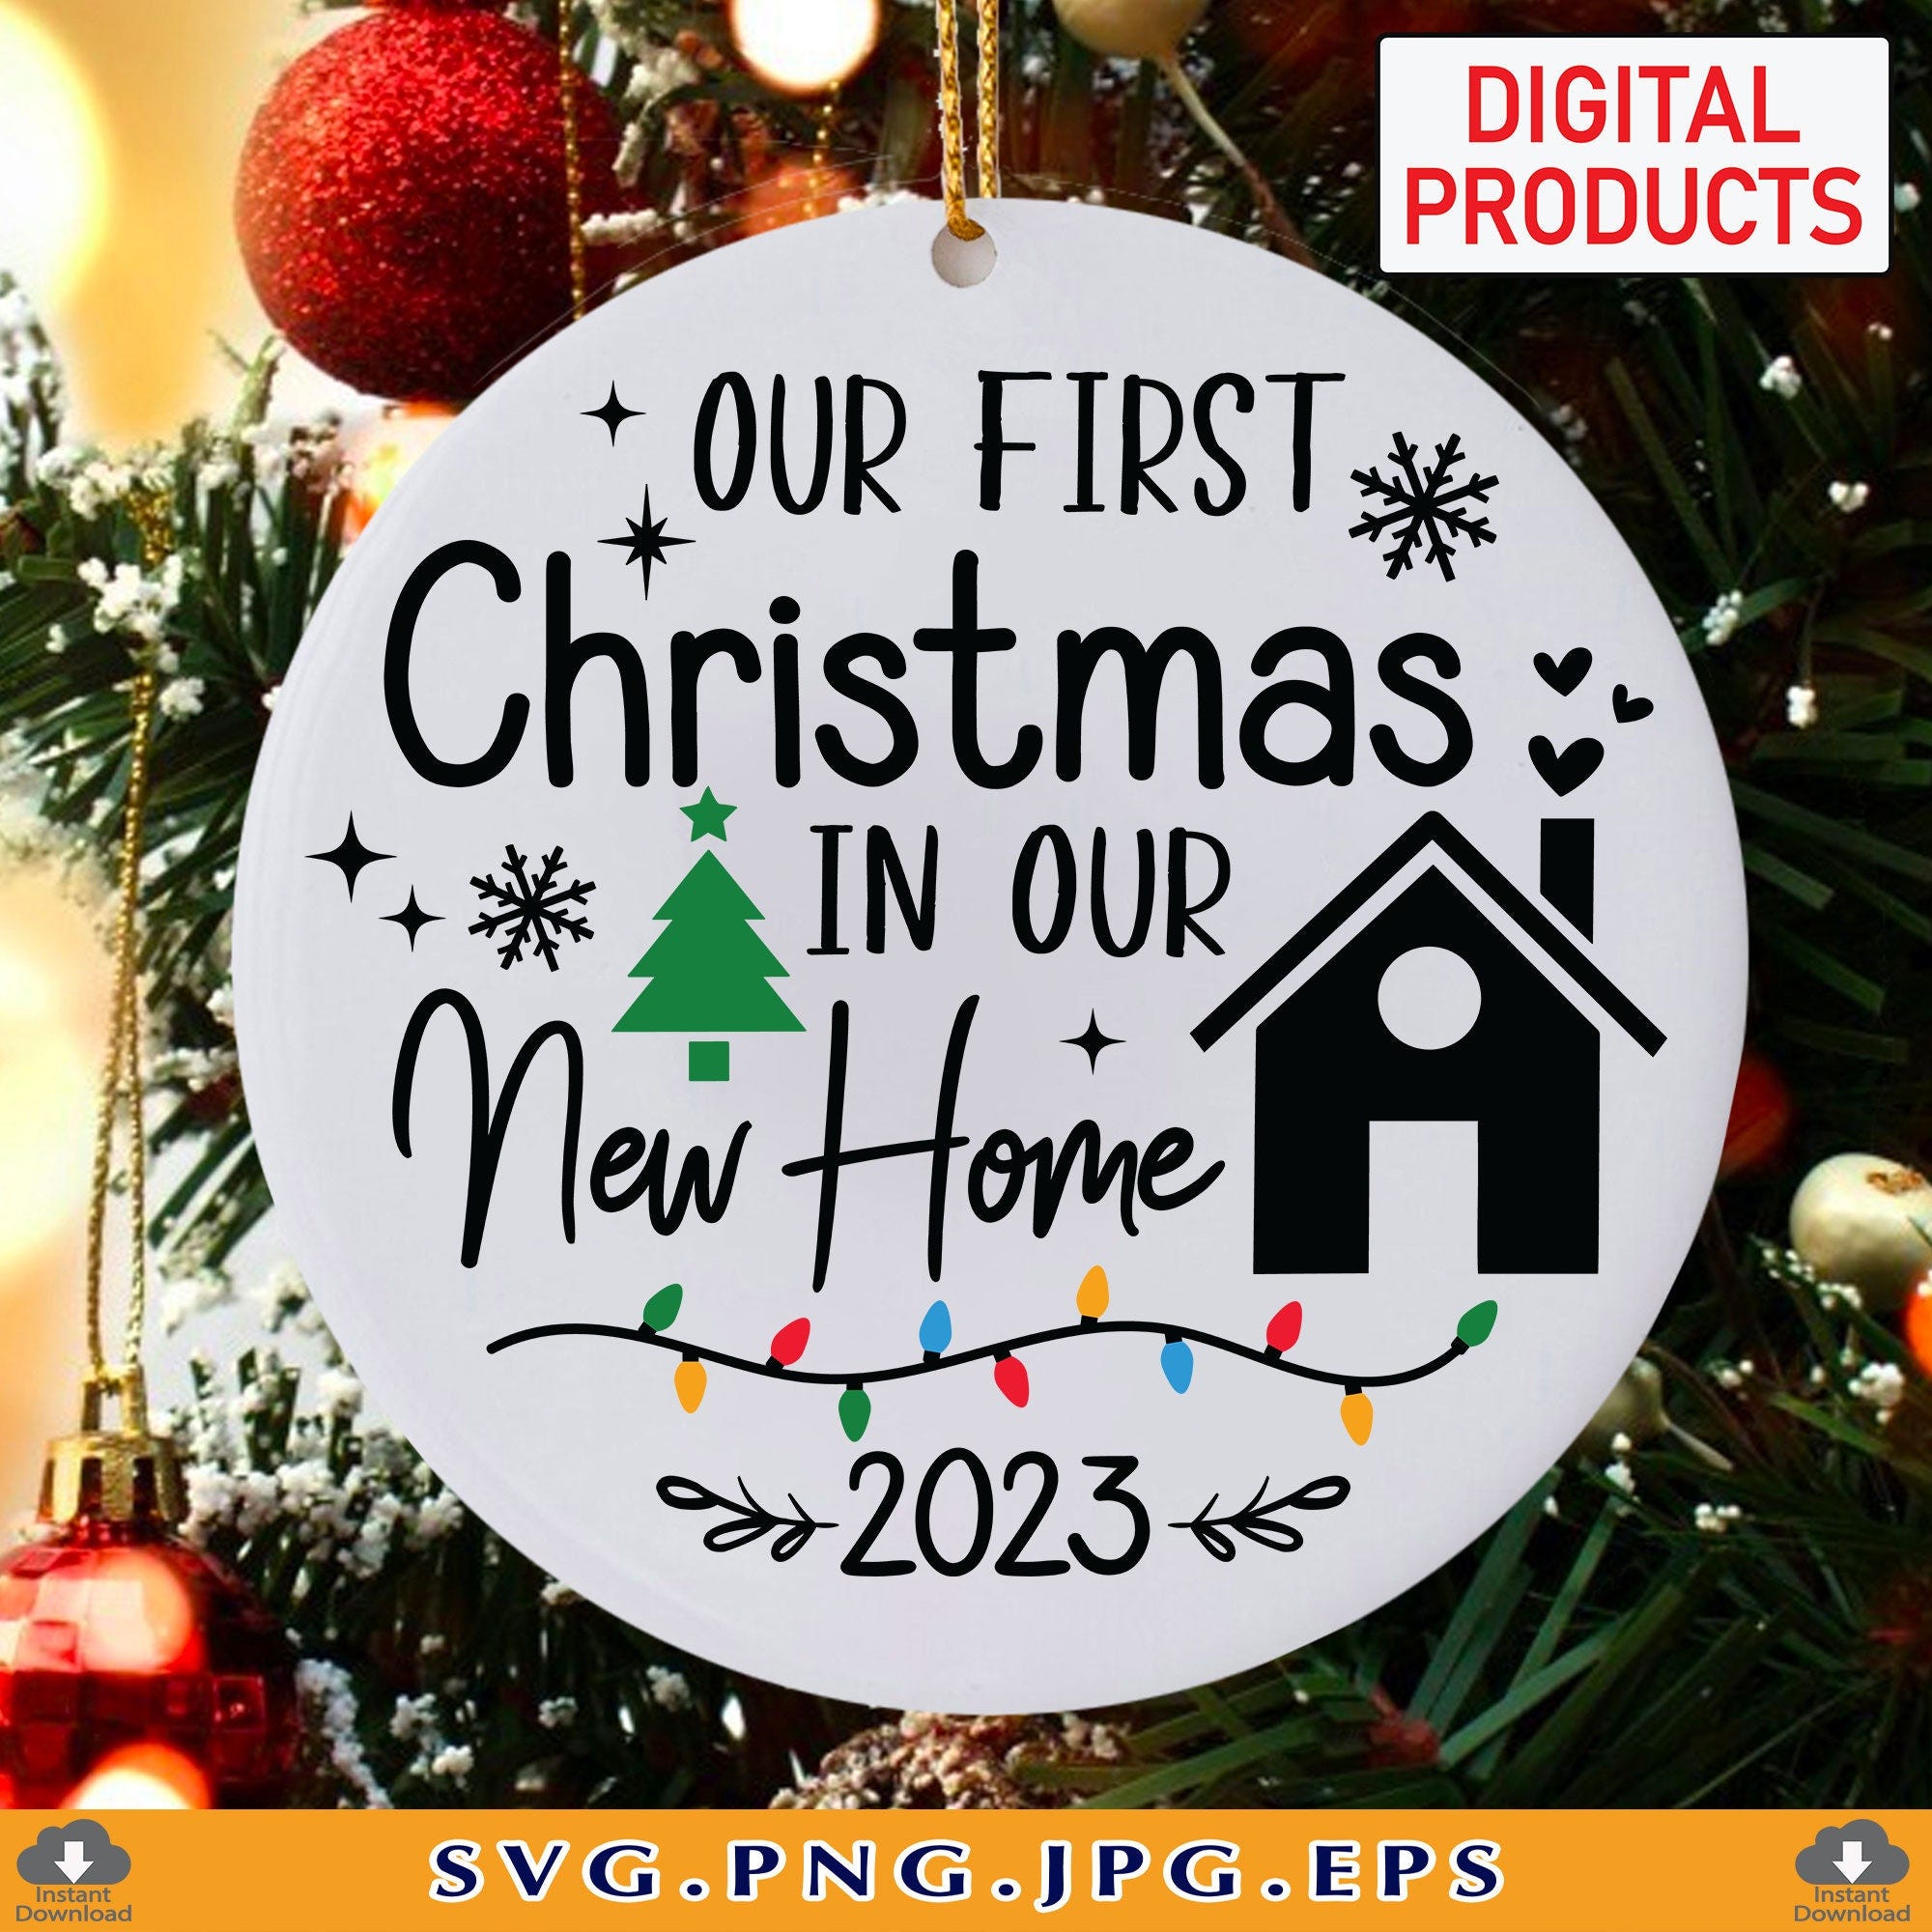 Our First Christmas in Our New Home SVG, 2023 Christmas Ornament SVG,1st Christmas New Home, Christmas Gifts, Cut Files For Cricut, Svg,PNG